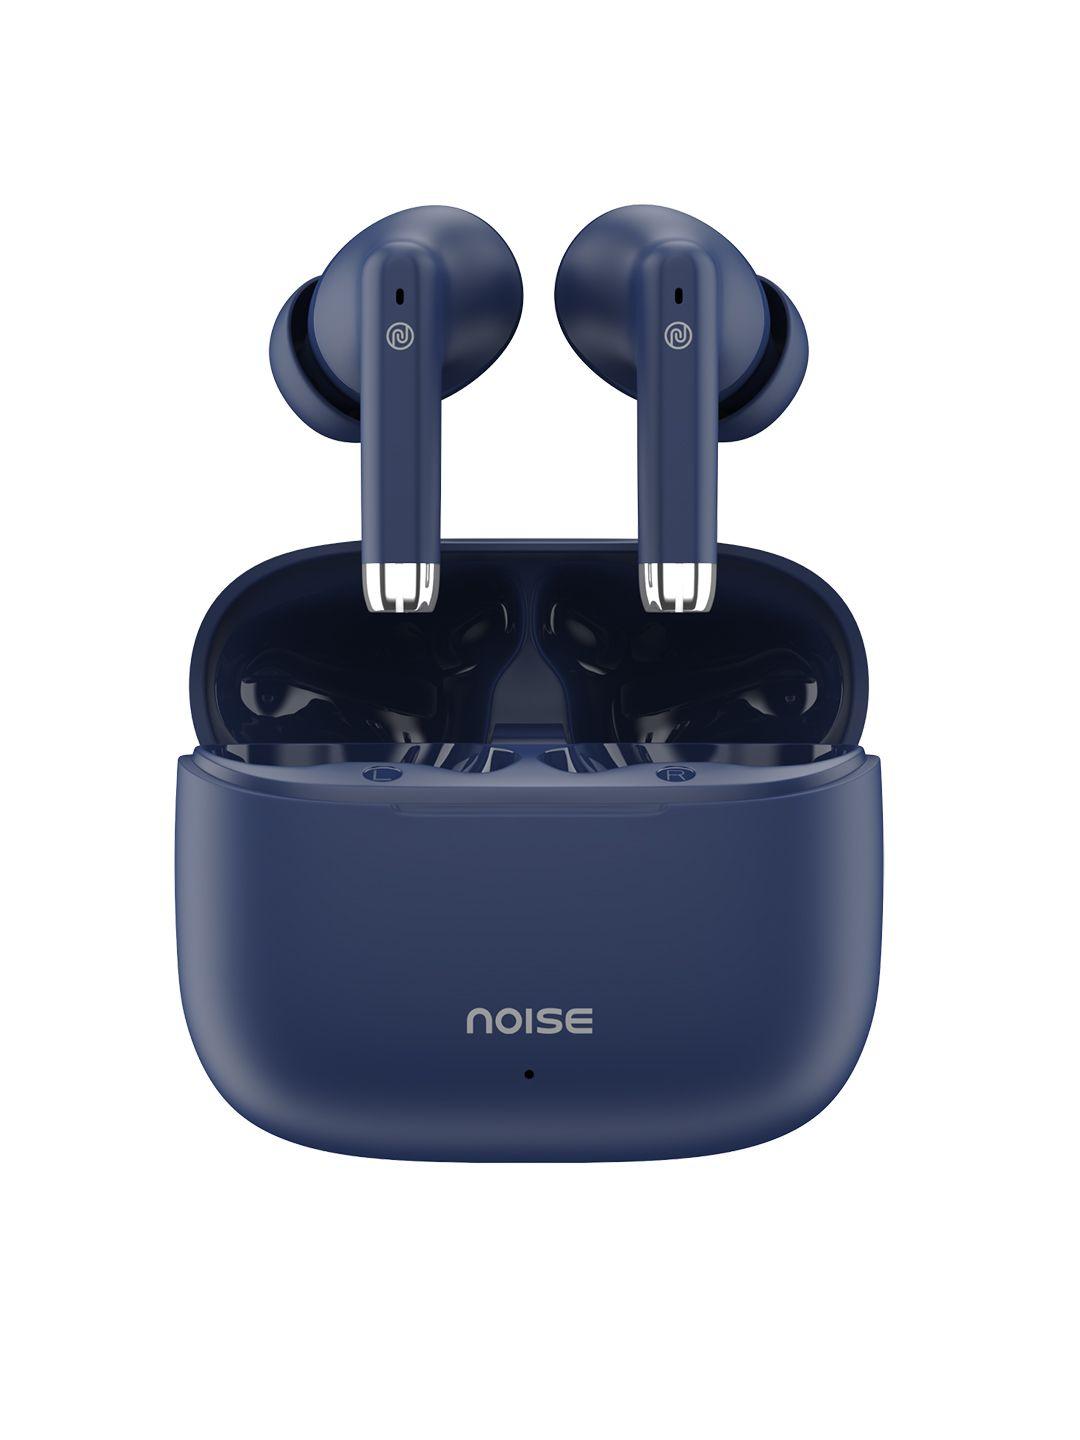 noise buds aero truly wireless earbuds with 45hrs playtime and 13mm driver - midnight blue